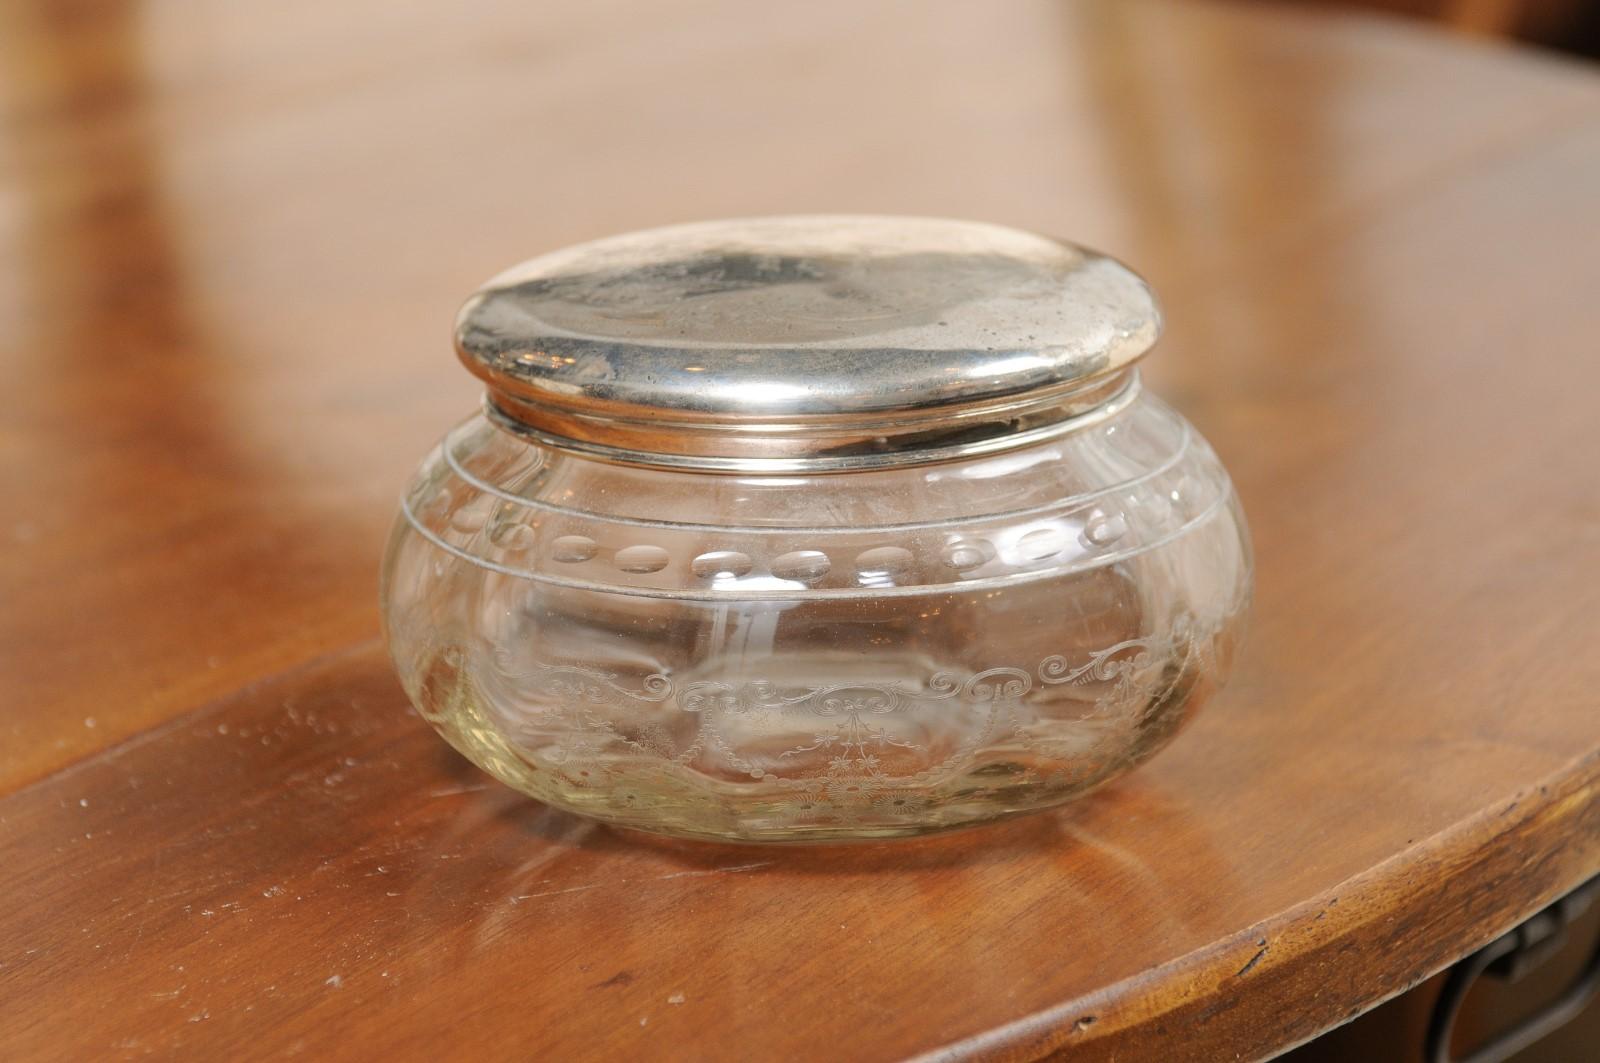 A small English glass vanity jar from the early years of the 20th century, with incised silver lid and etched design. Created in England during the first quarter of the 20th century, this petite jar features a circular glass body adorned with a